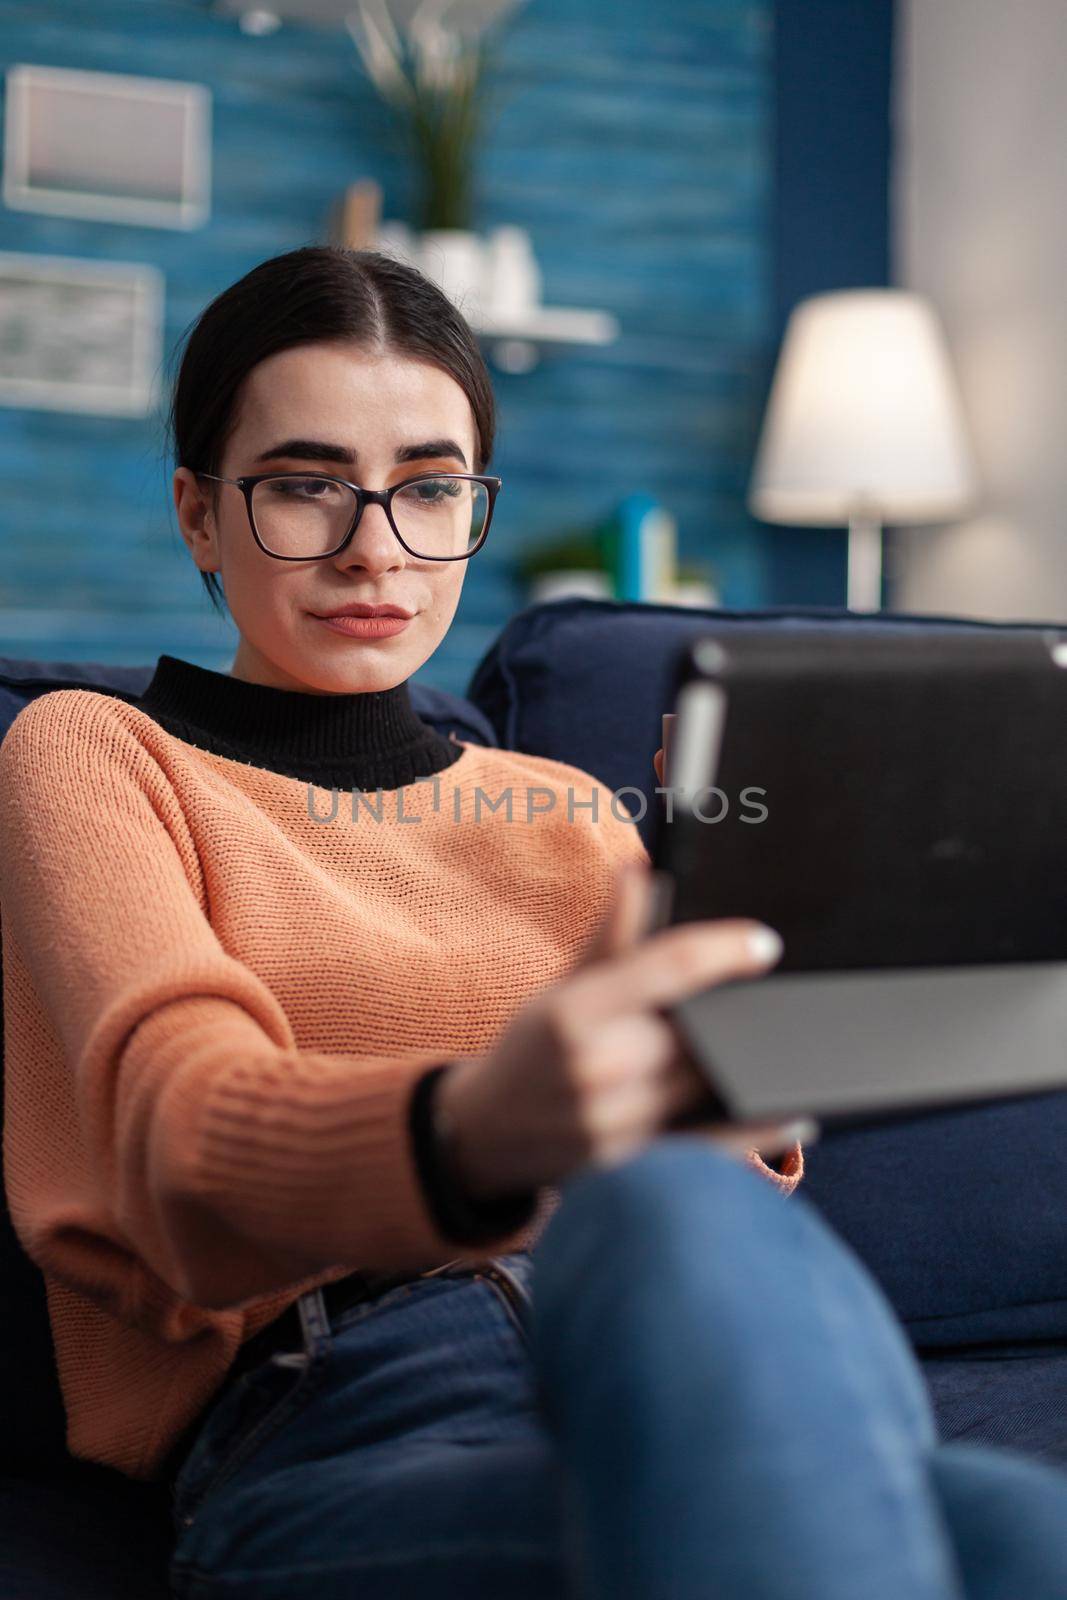 Portrait of student looking at tablet computer, sitting on sofa in living room drinking coffee. Teenager studying social communication using university digital app on mobile device